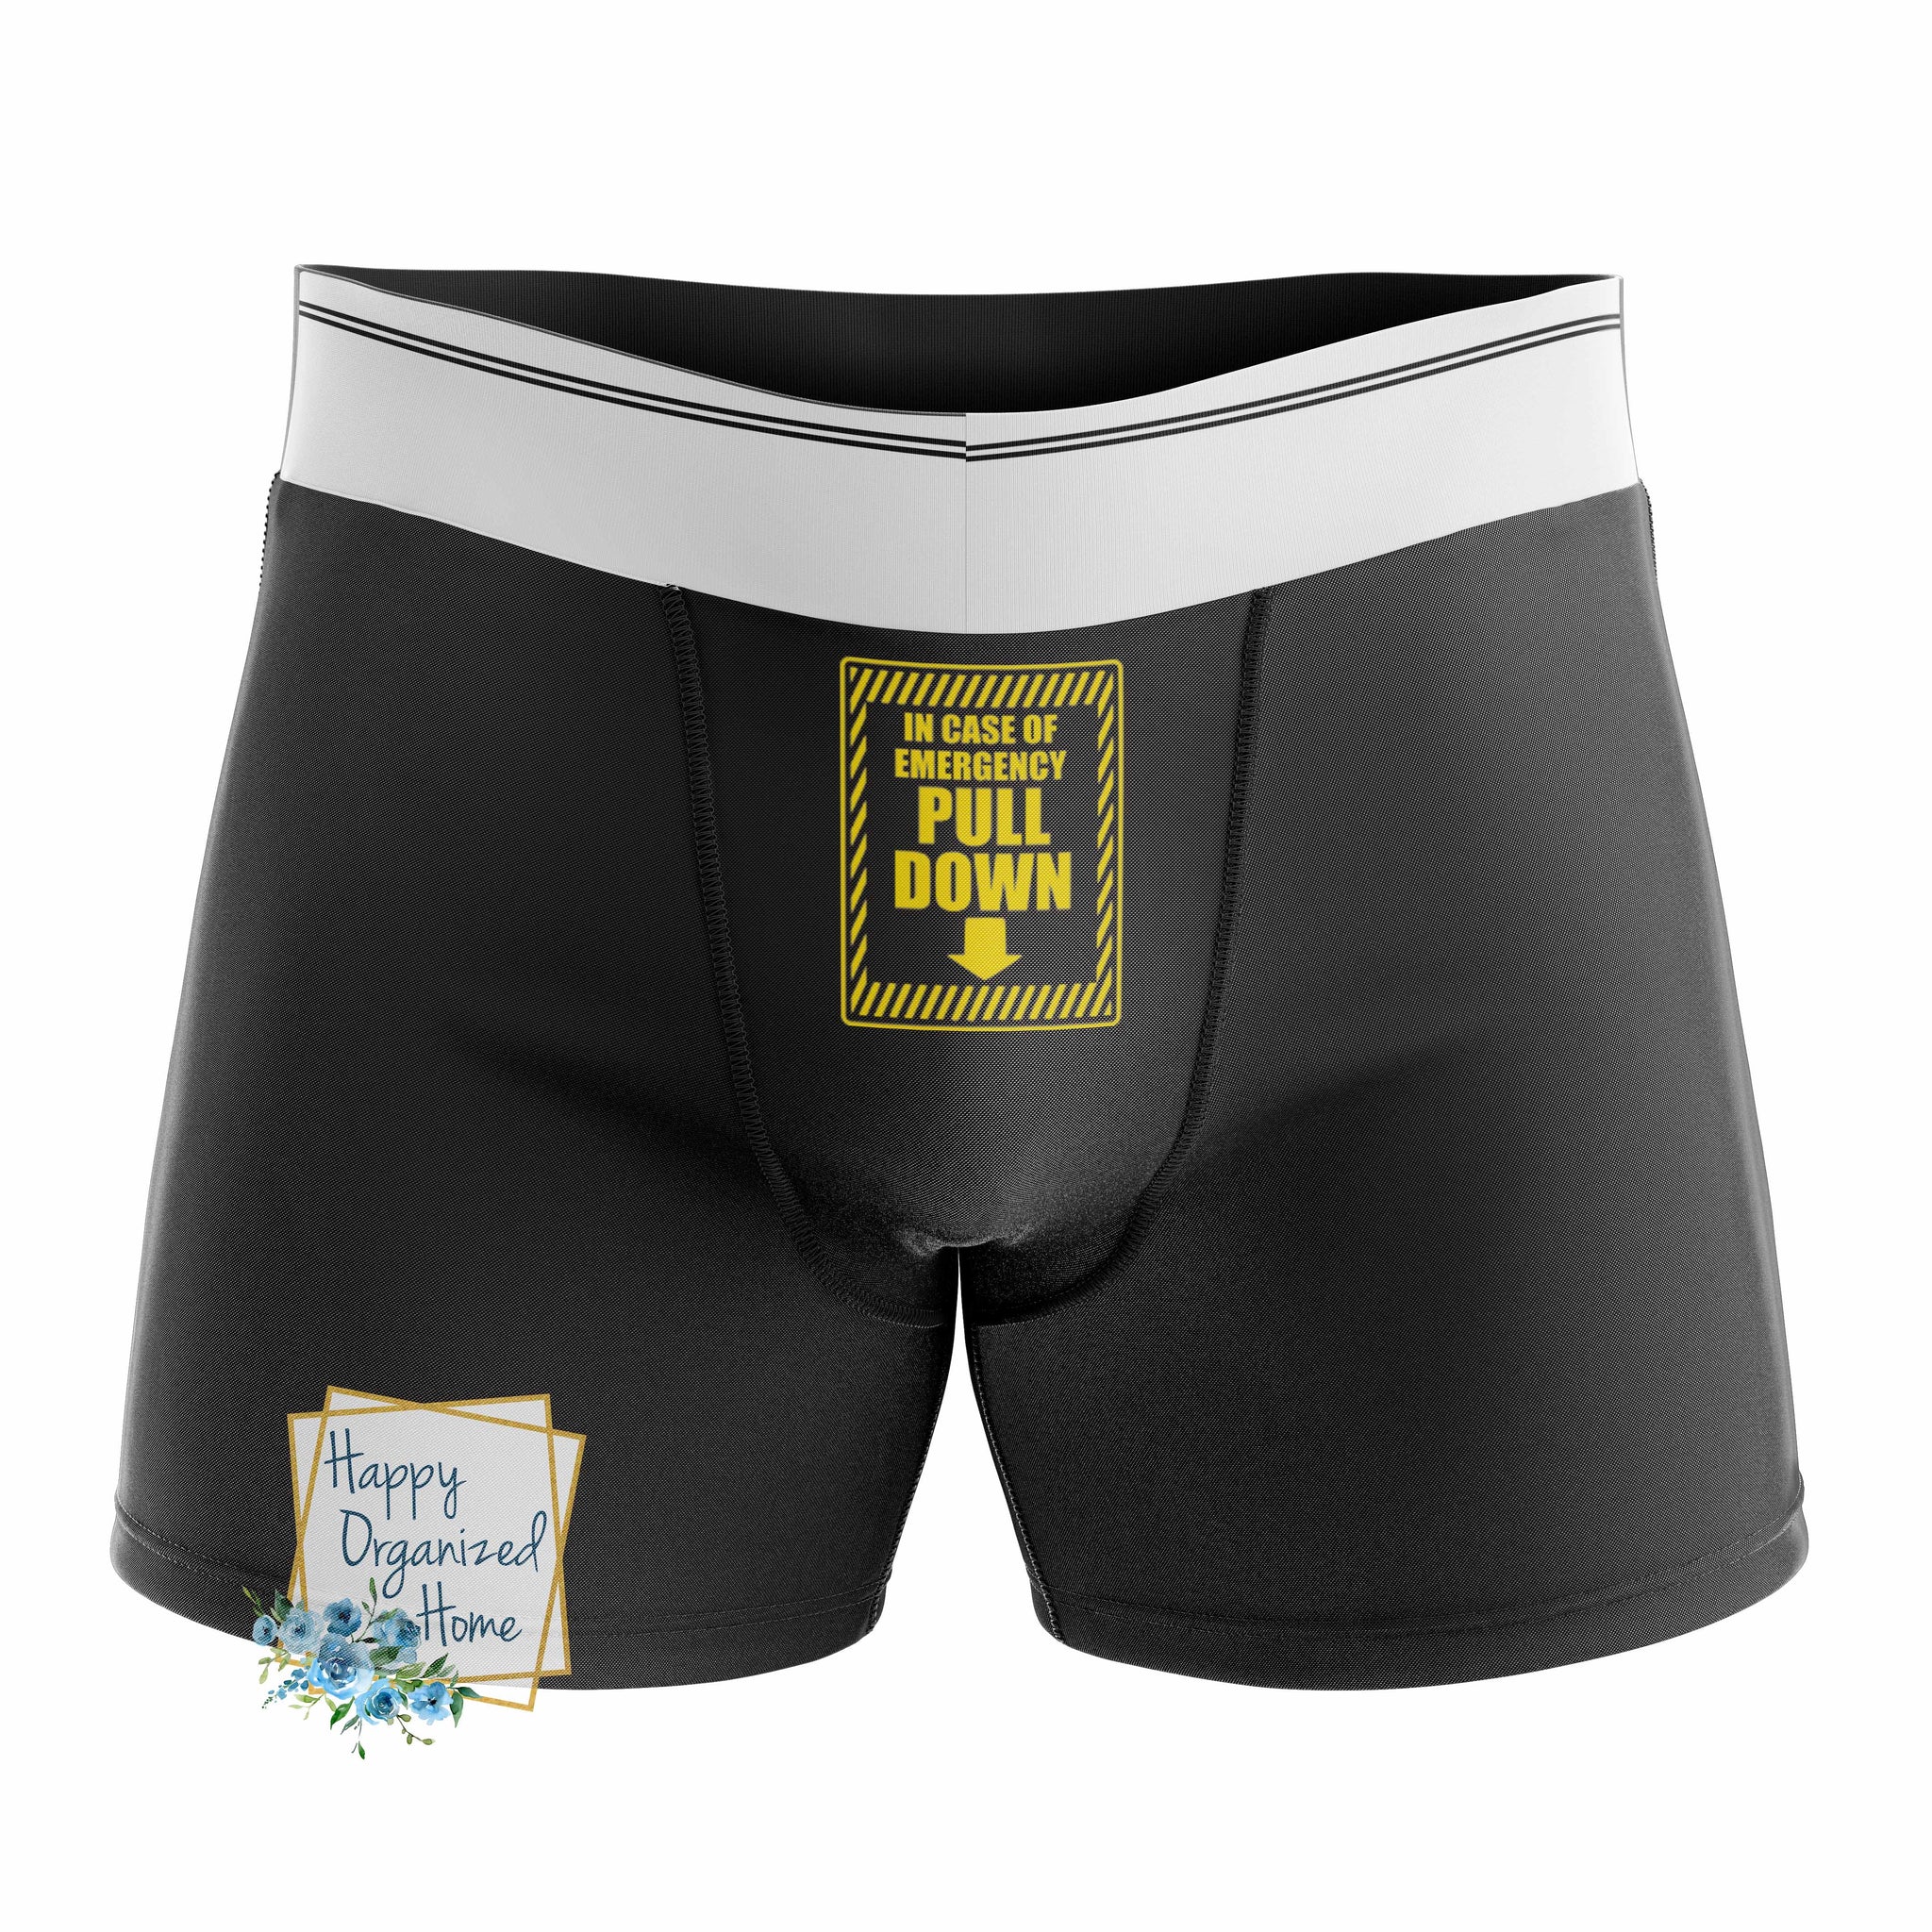 In case of Emergency PULL DOWN Men's Naughty Boxer Briefs – Happy Organized  Home